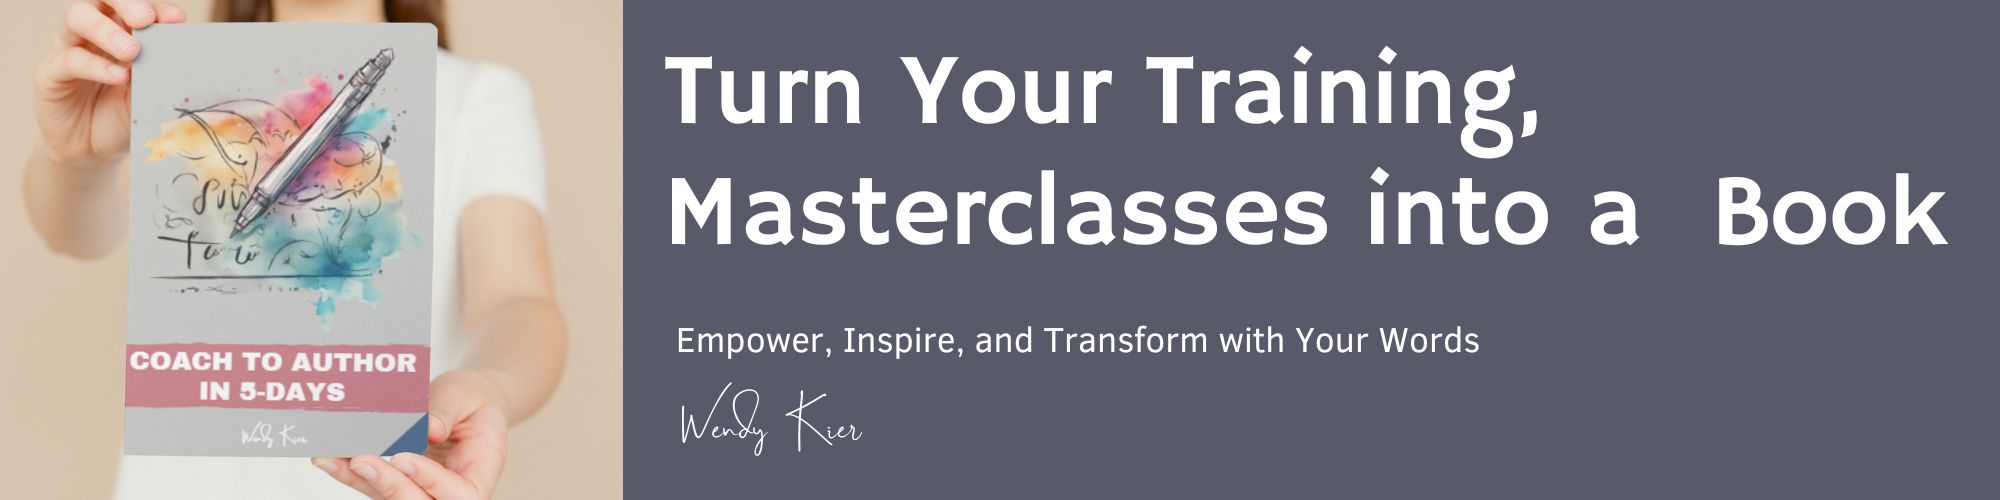 Turn Your Training, Masterclasses into a  Book